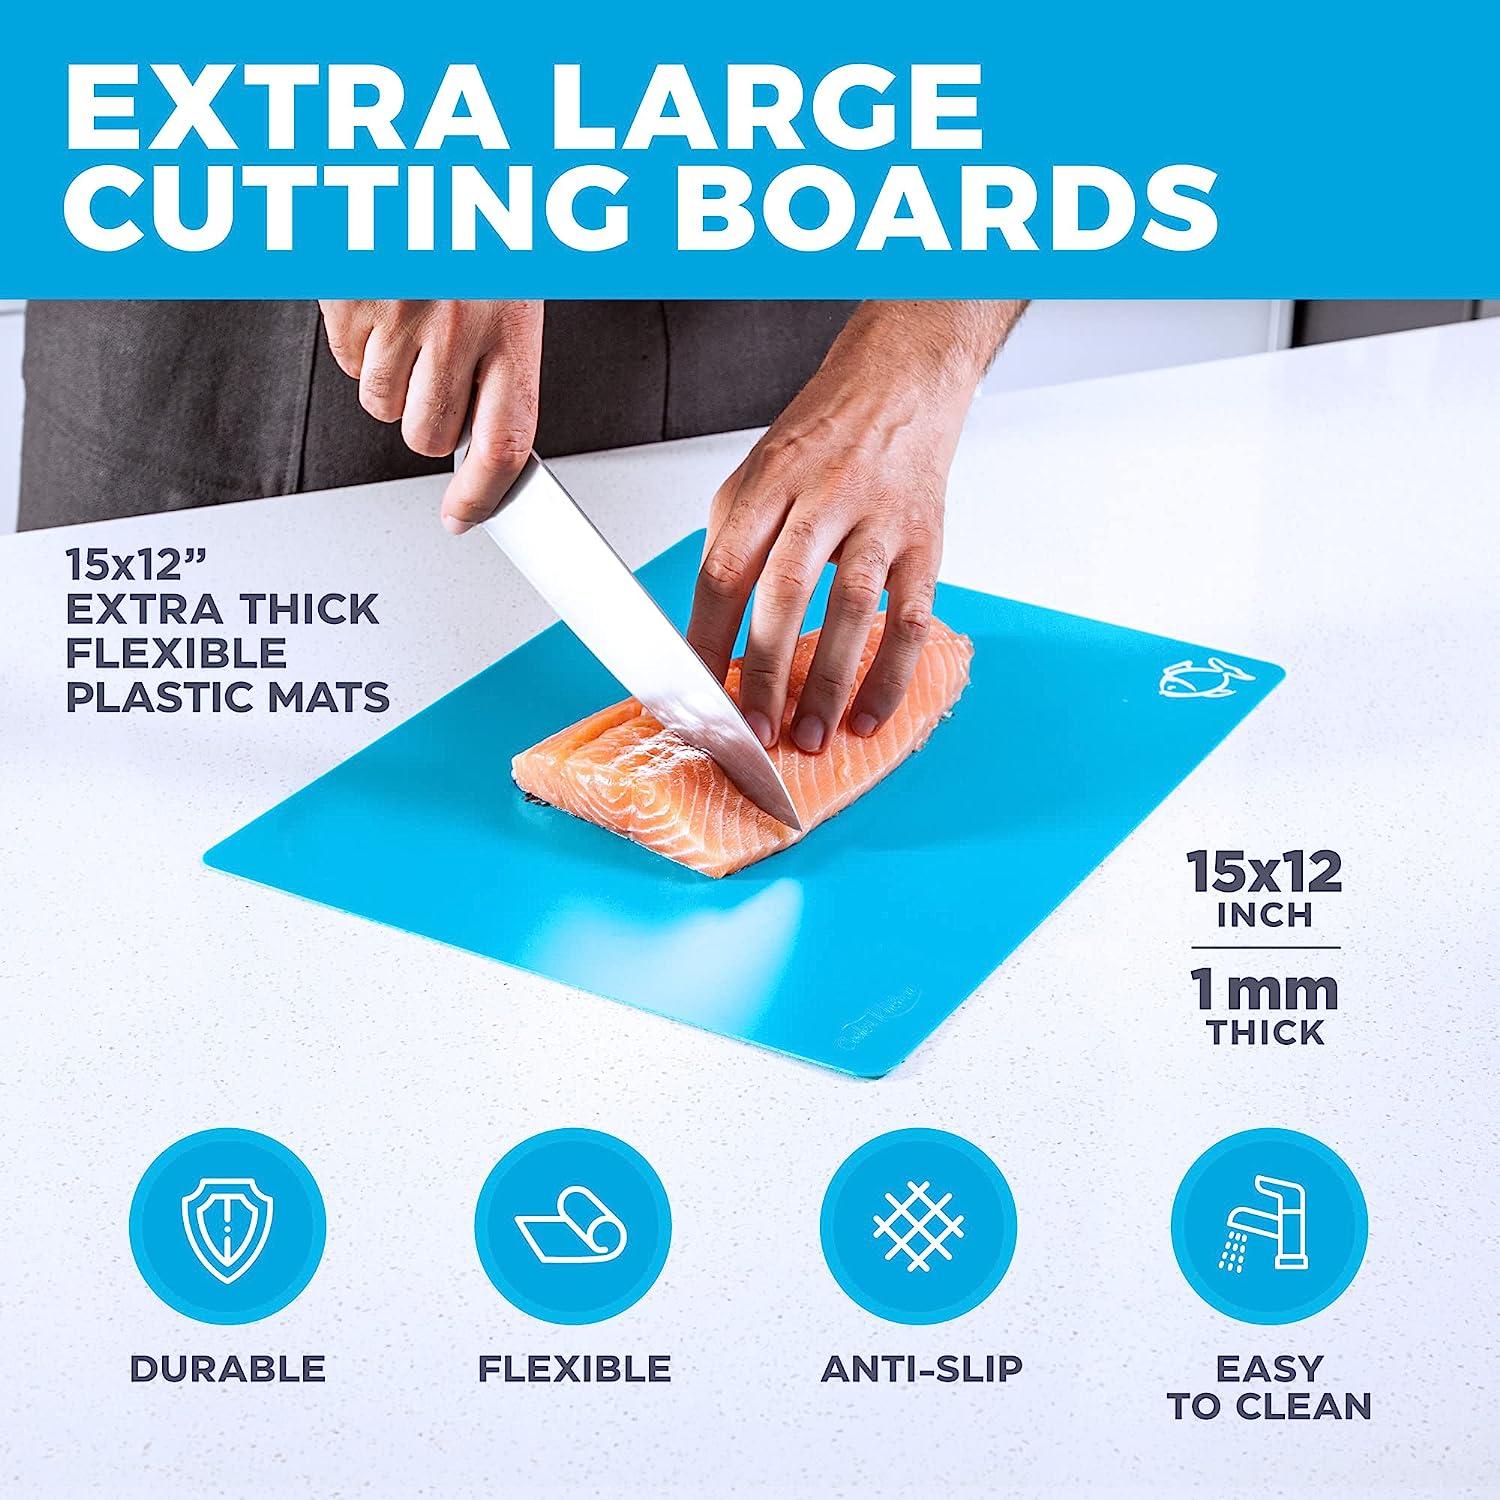 Disposable Cutting Board Disposable Cutting Board Mat Kitchen Cooking Cutting  Board Paper Fruit Placemat Can Be Cut